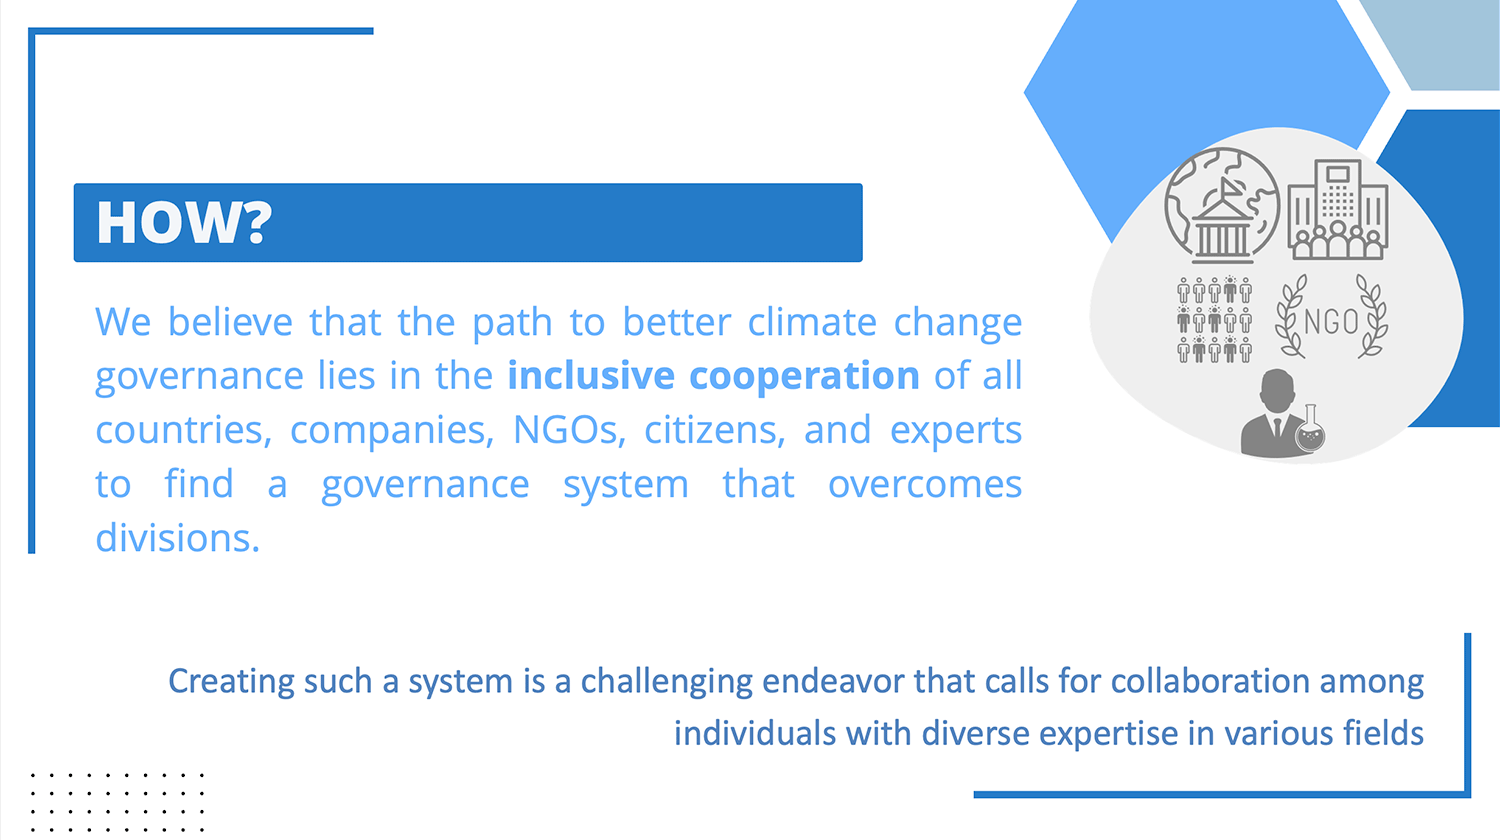 We believe that the way to a better climate change governance lies in inclusive cooperation of all countries, companies, NGO‘s, citizens, and experts to find a governance system that overcomes divisions.